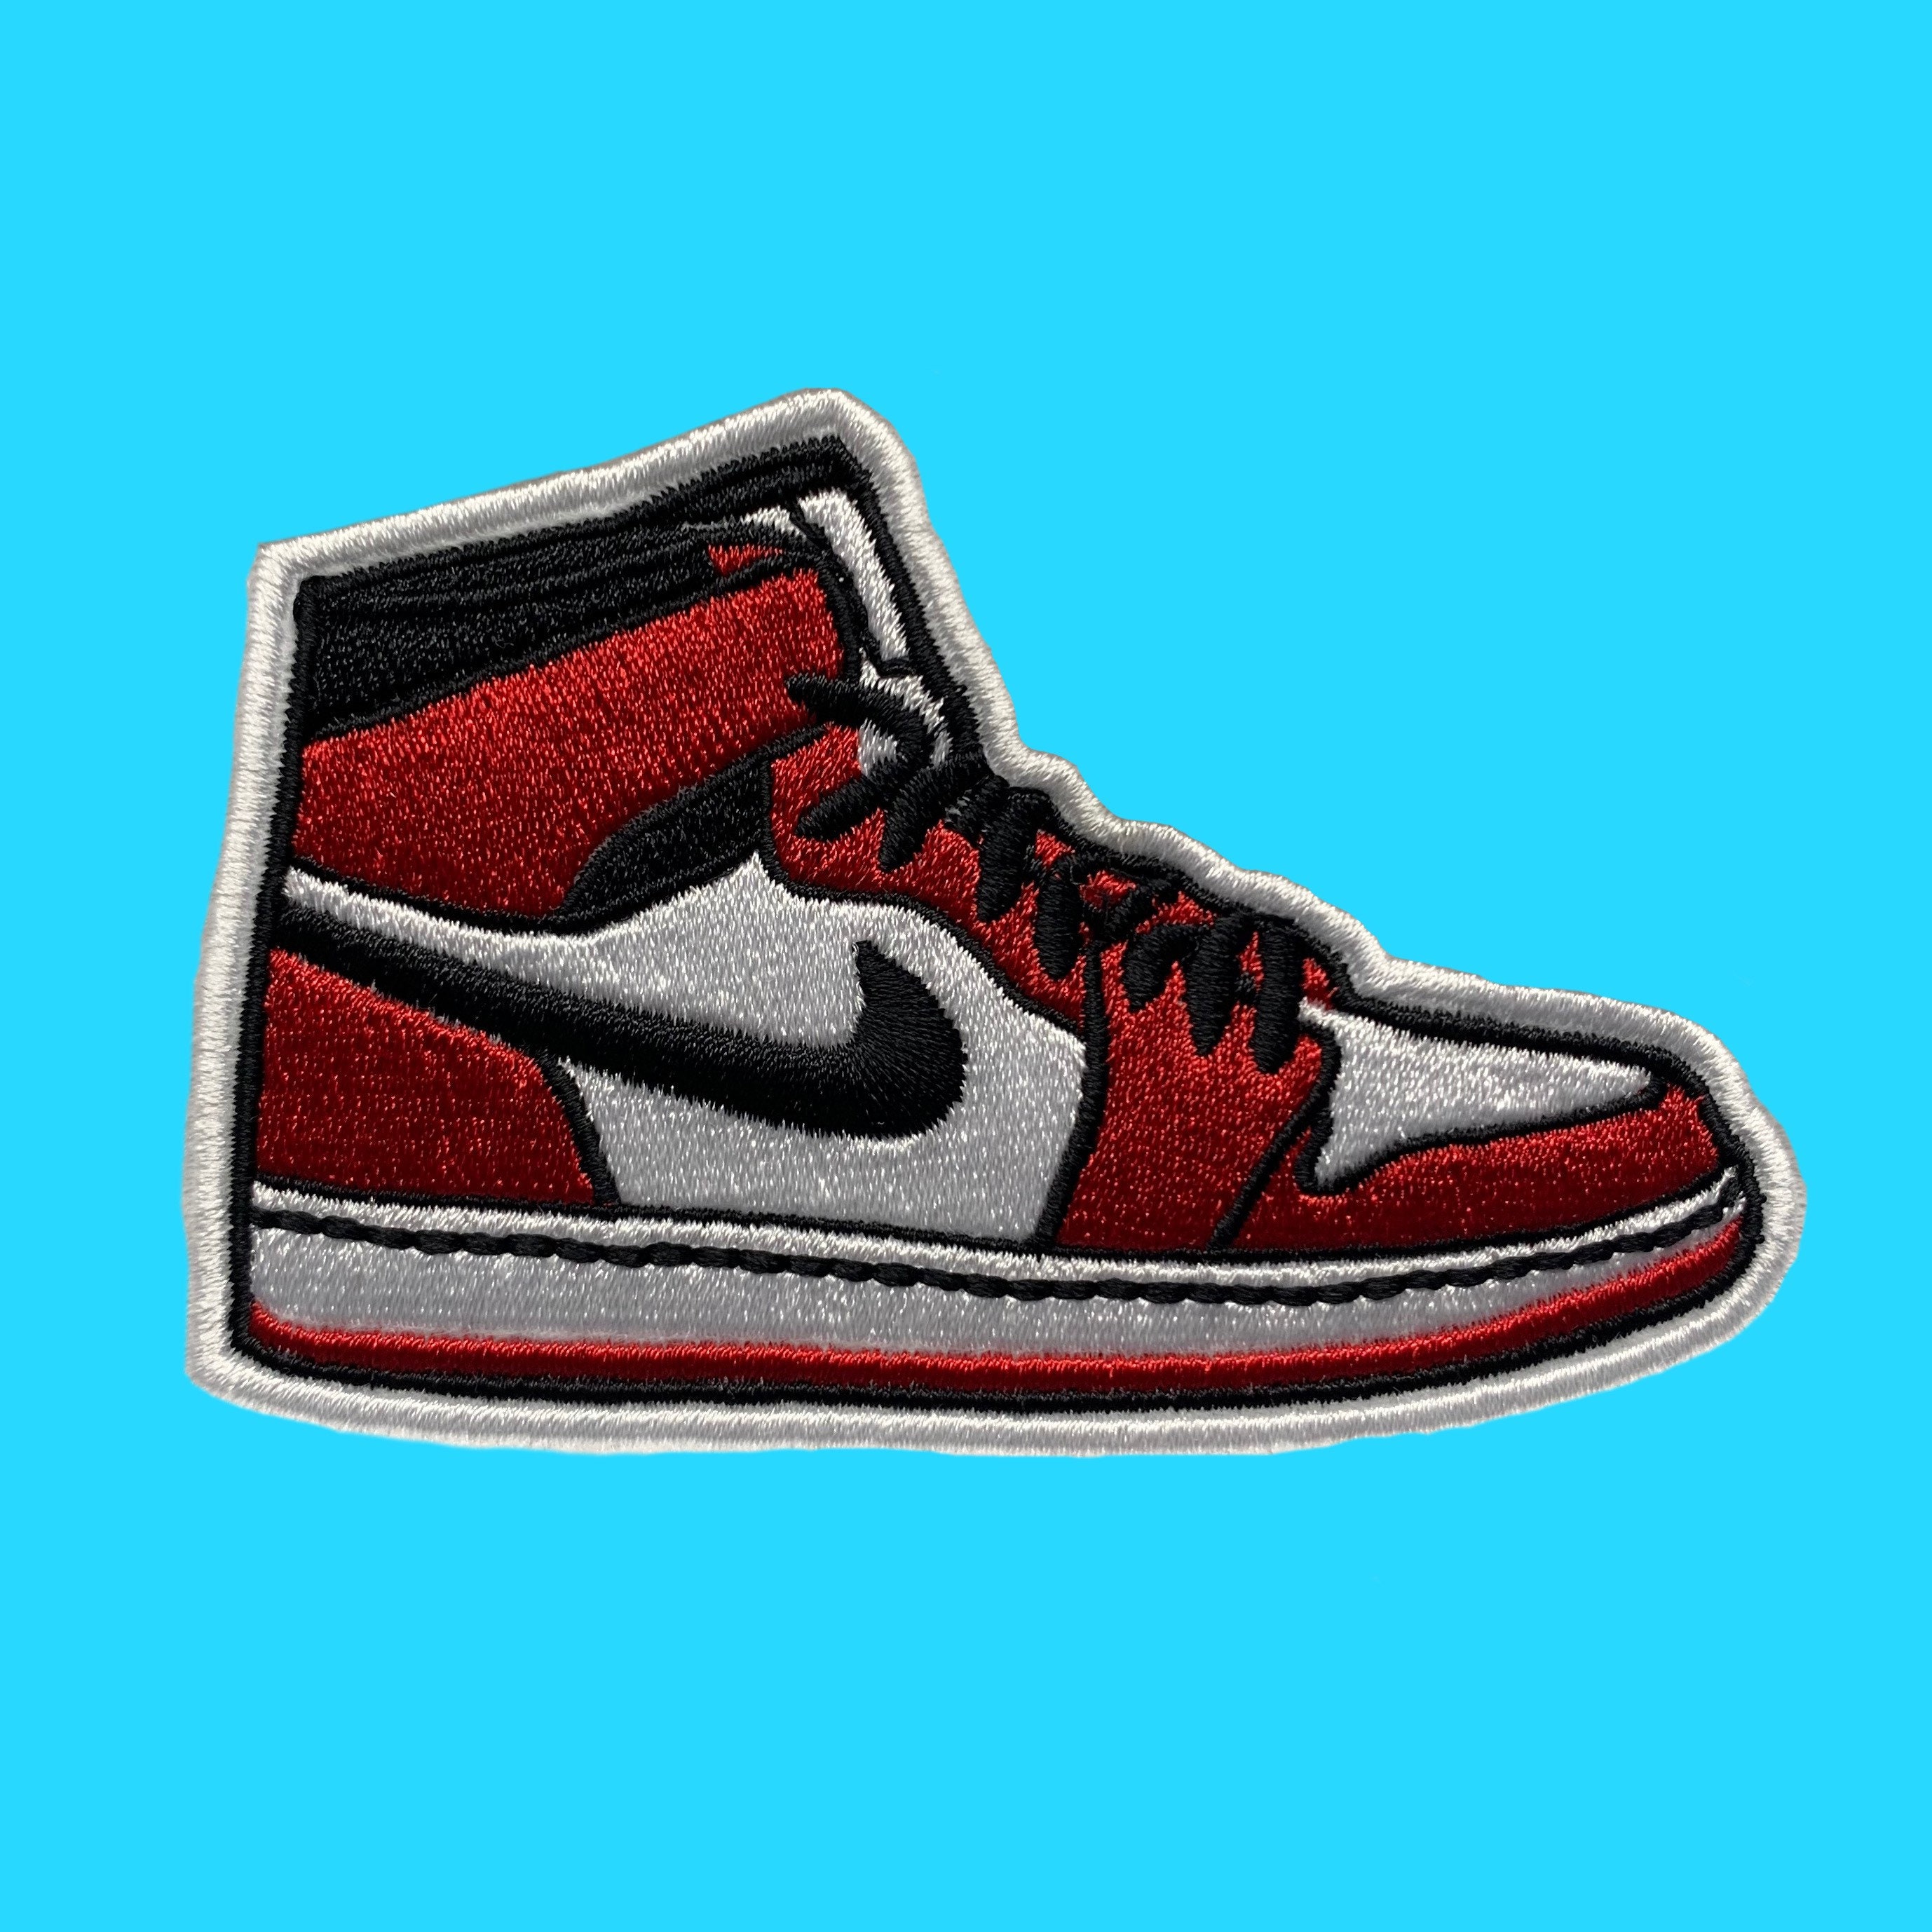 Iron on Patch Nike 